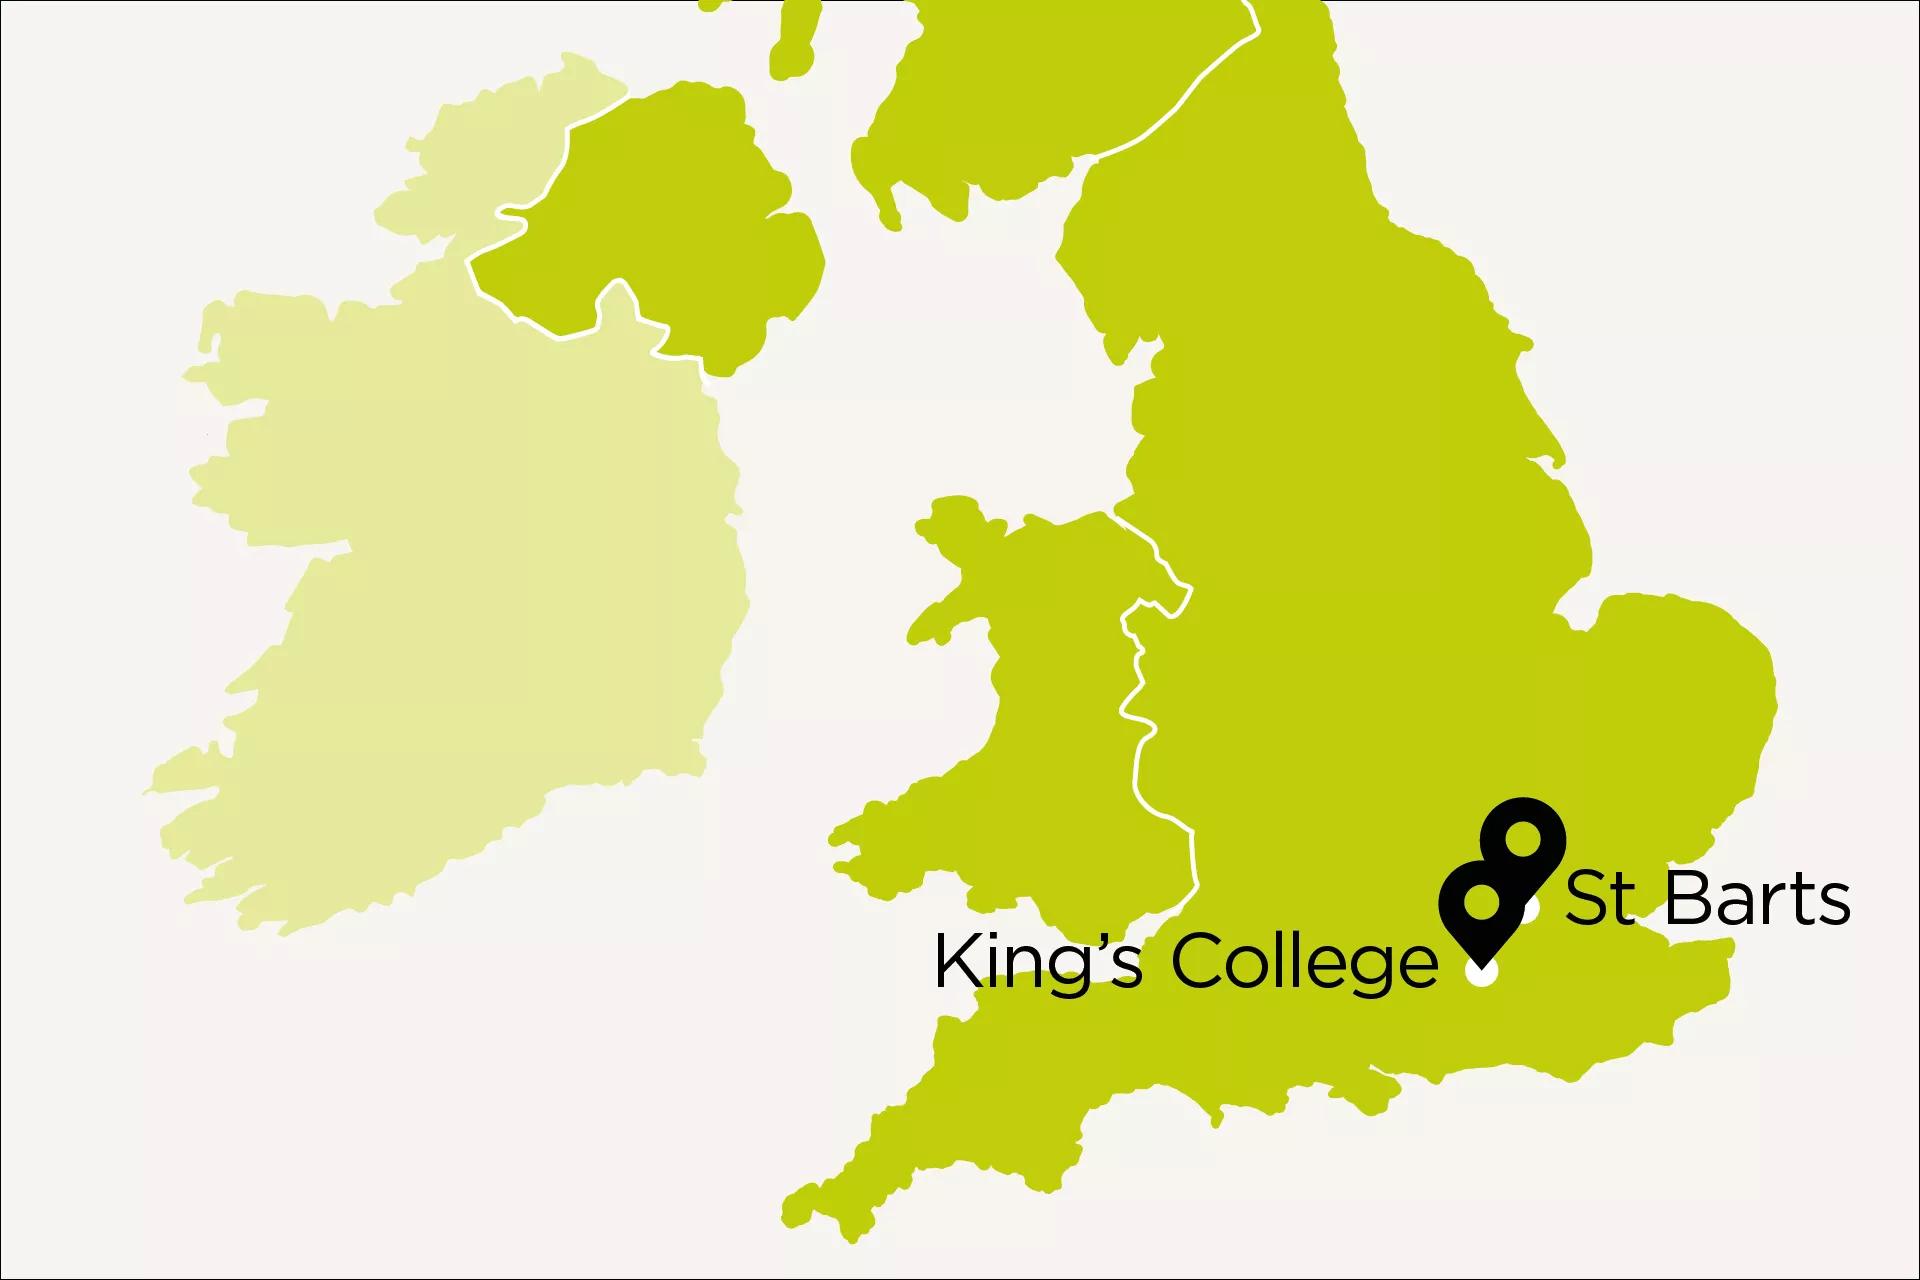 Map of UK with King's College and St. Barts pinpoints